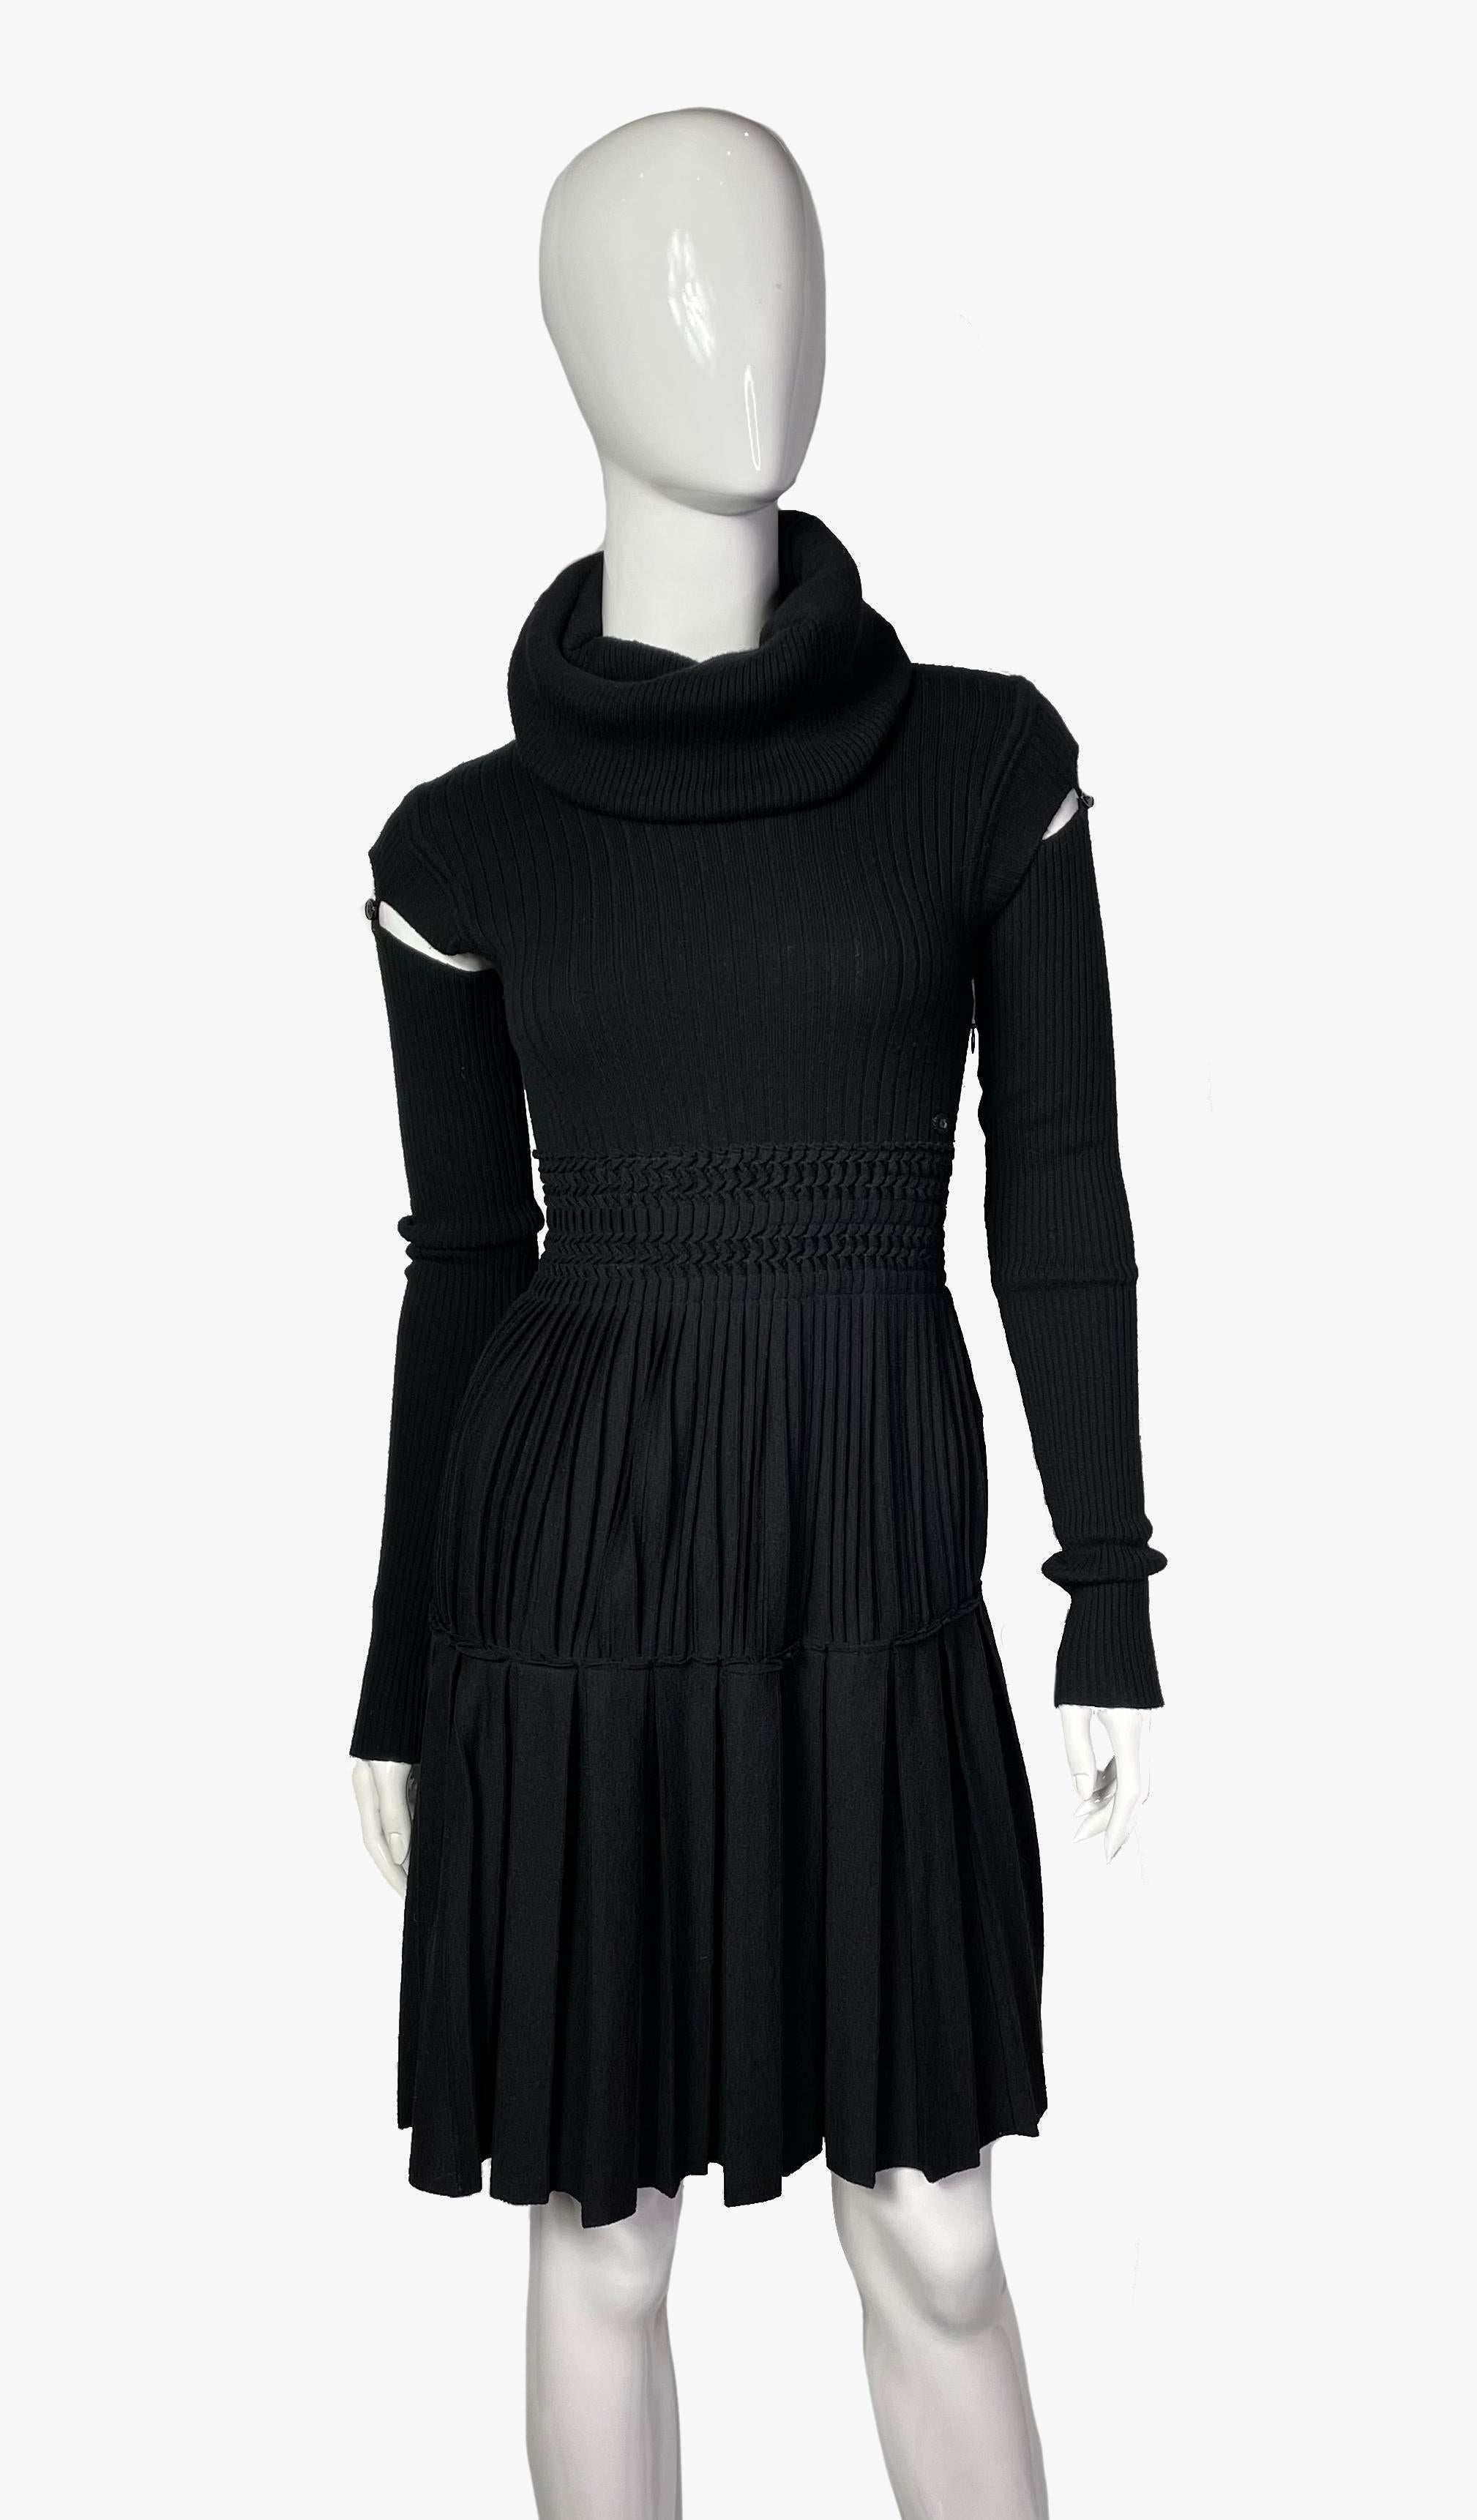 Chanel black ribbed wool midi dress by Karl Lagerfeld. 
Scoop neck, long detachable sleeves. 
Period: 2010s
Size: FR 34 
Composition: 100% wool. 
Condition: very good. Please note, one button on the sleeve is lost and substituted by another. 